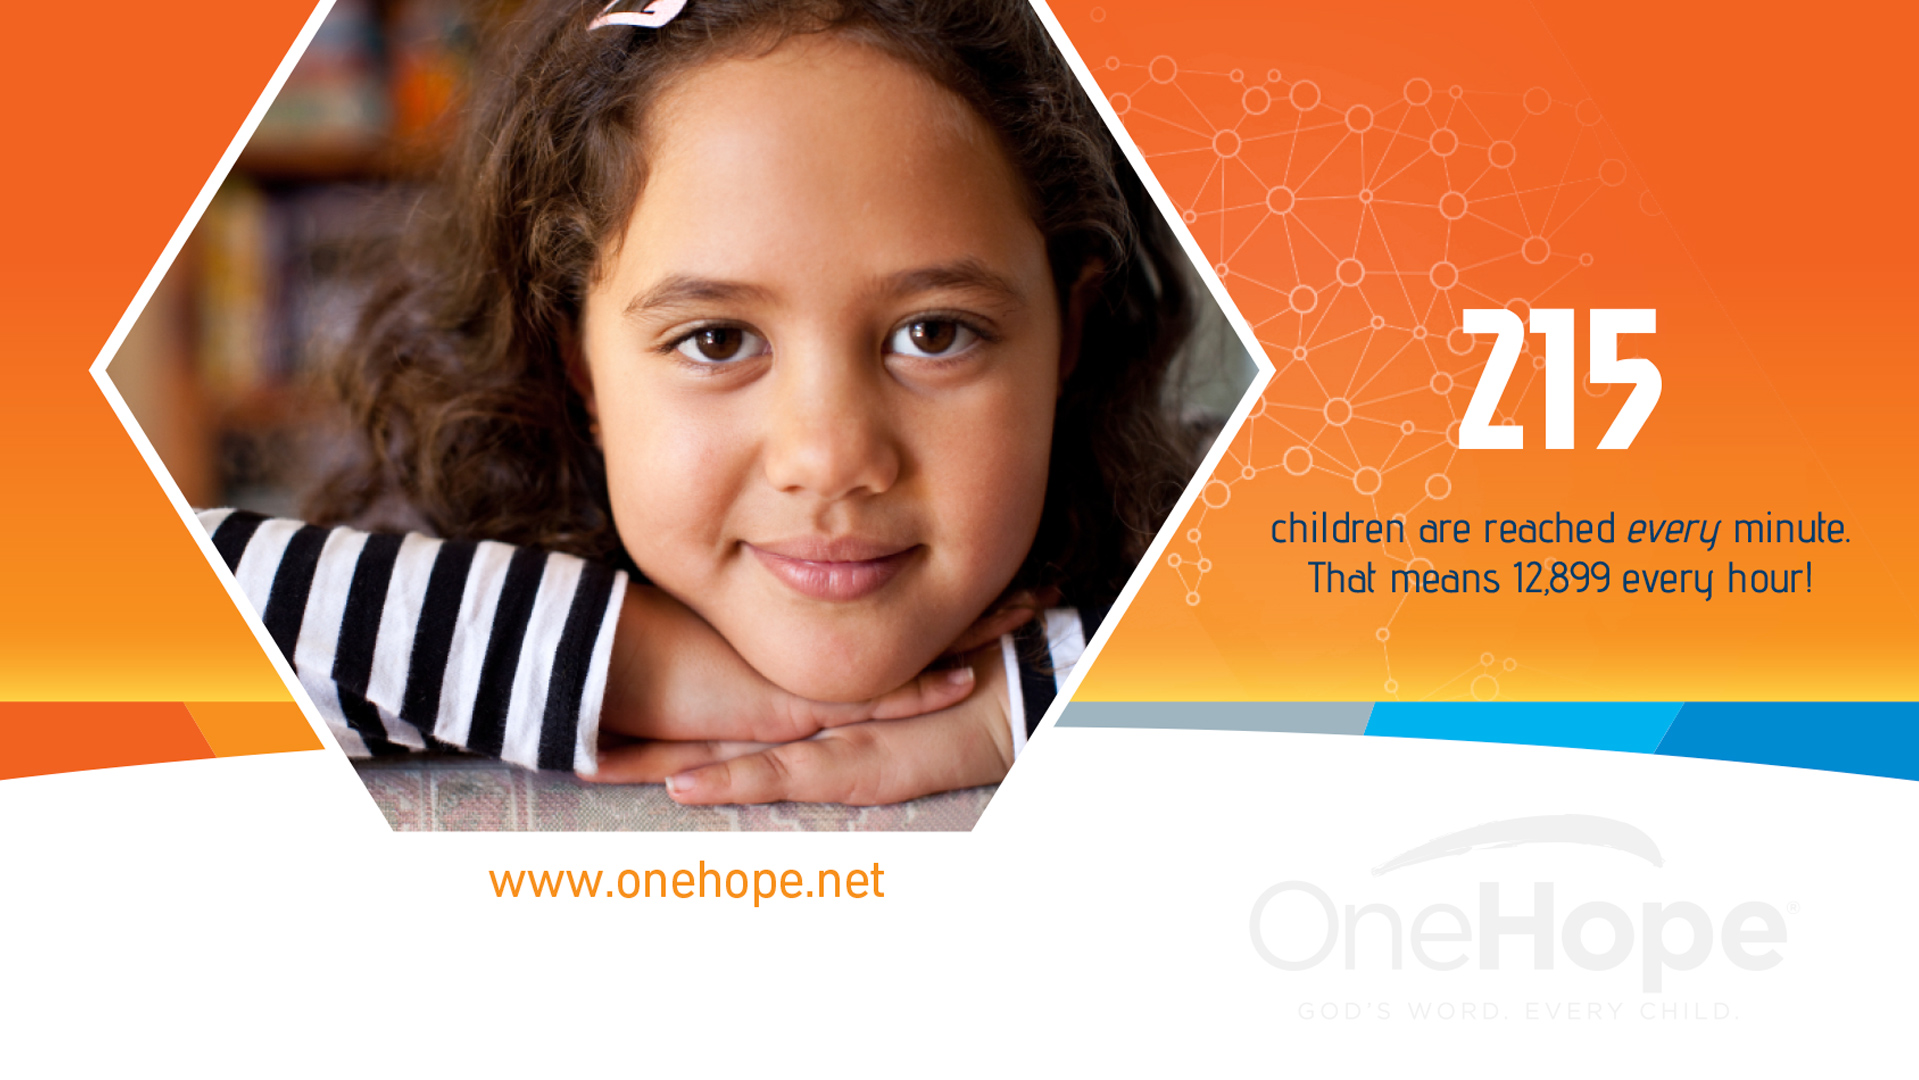 OneHope 215 Children Reached